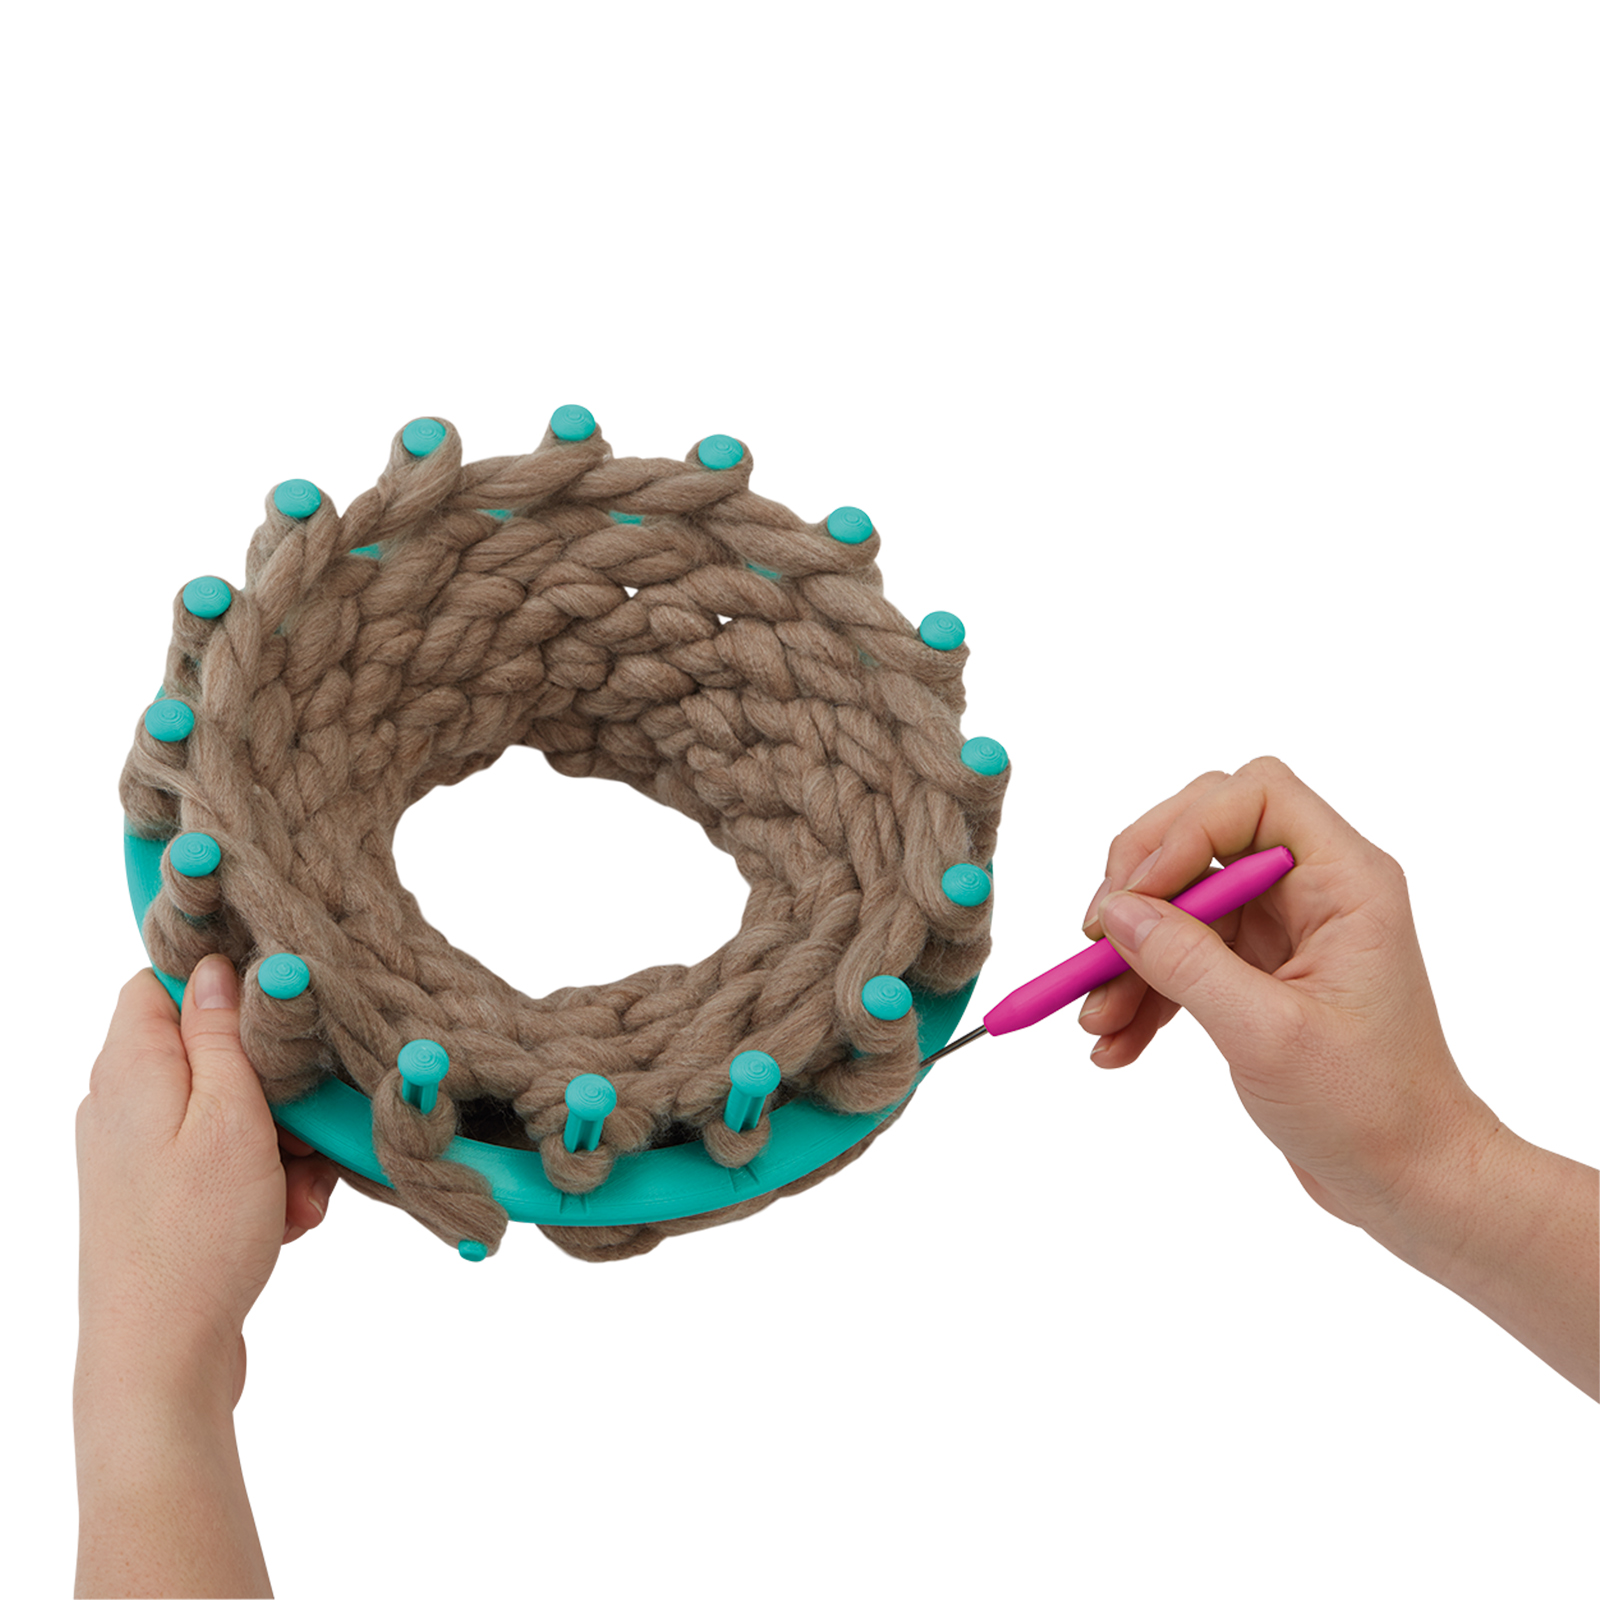 Buy the Knit Quick™ Chunky Loom Set By Loops & Threads™ at Michaels